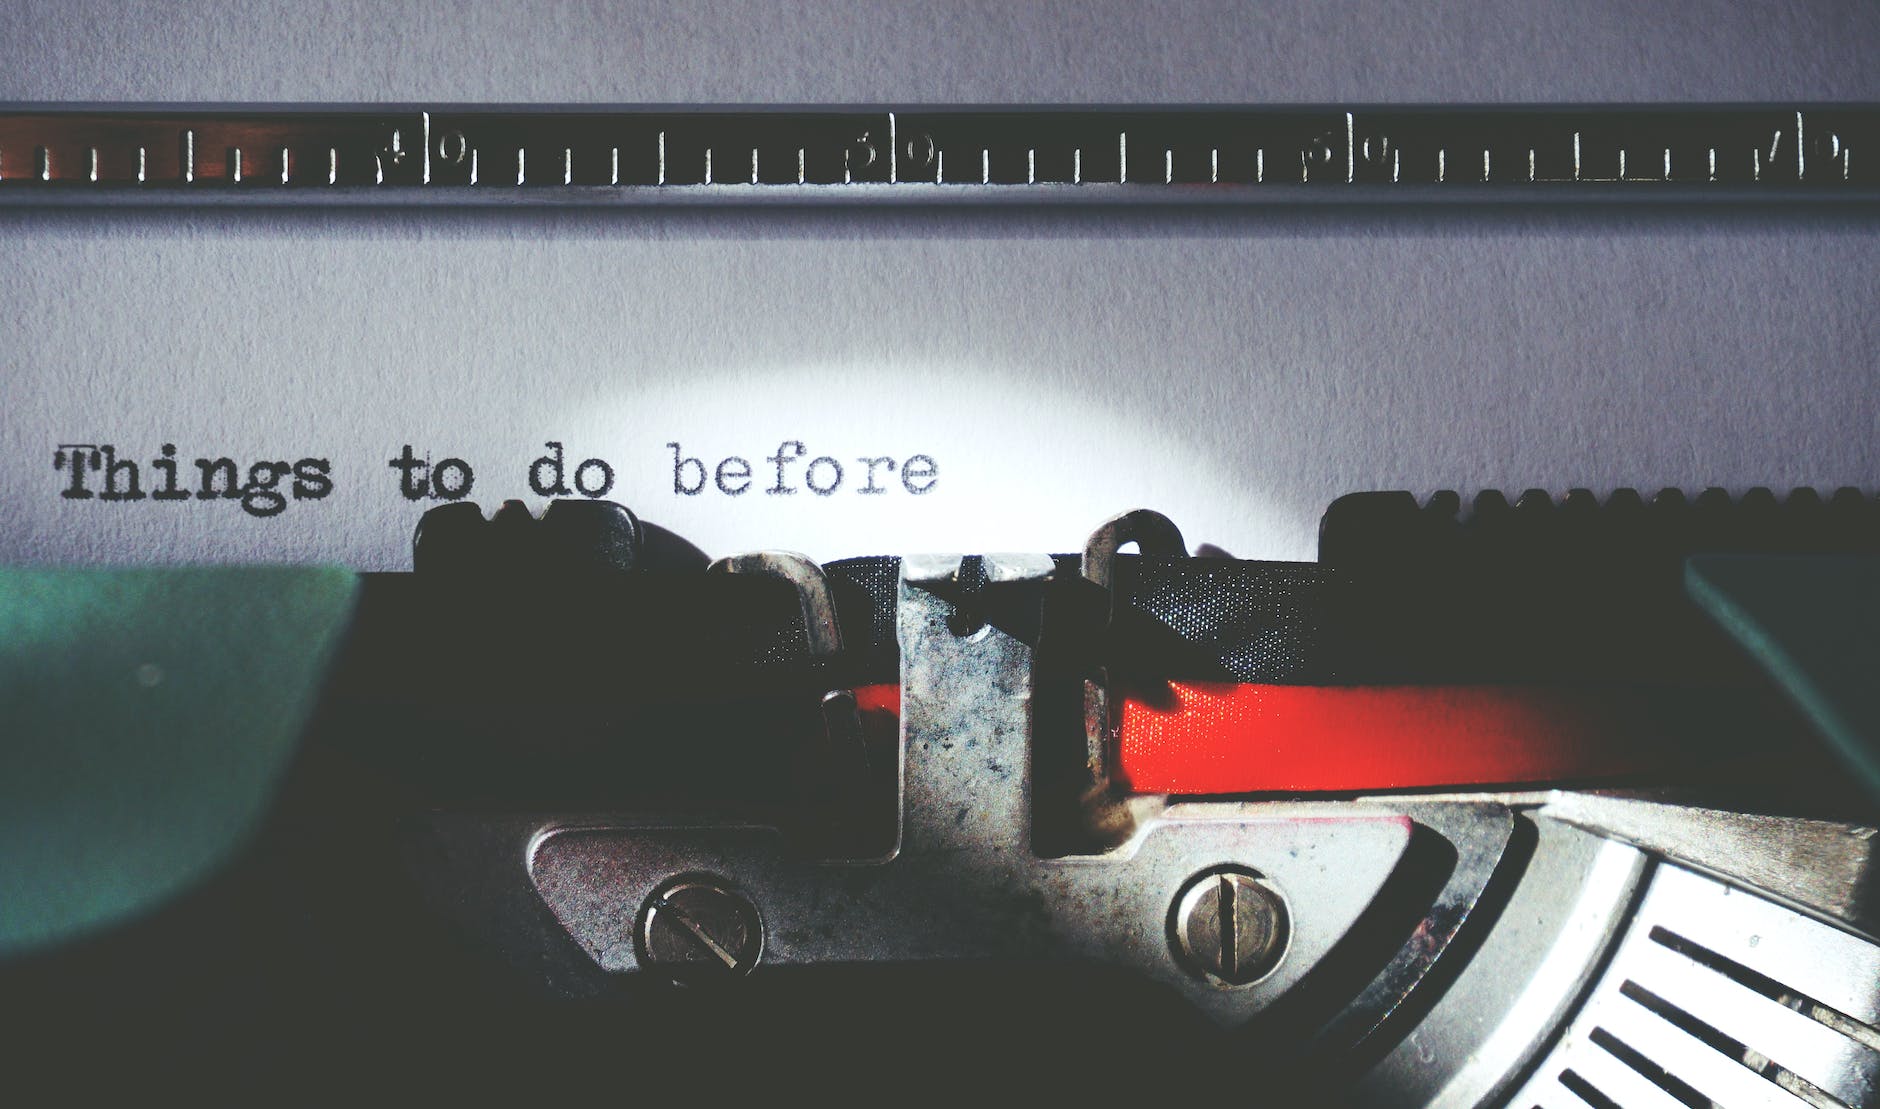 Typewriter with "Things to do before "written on sheet.